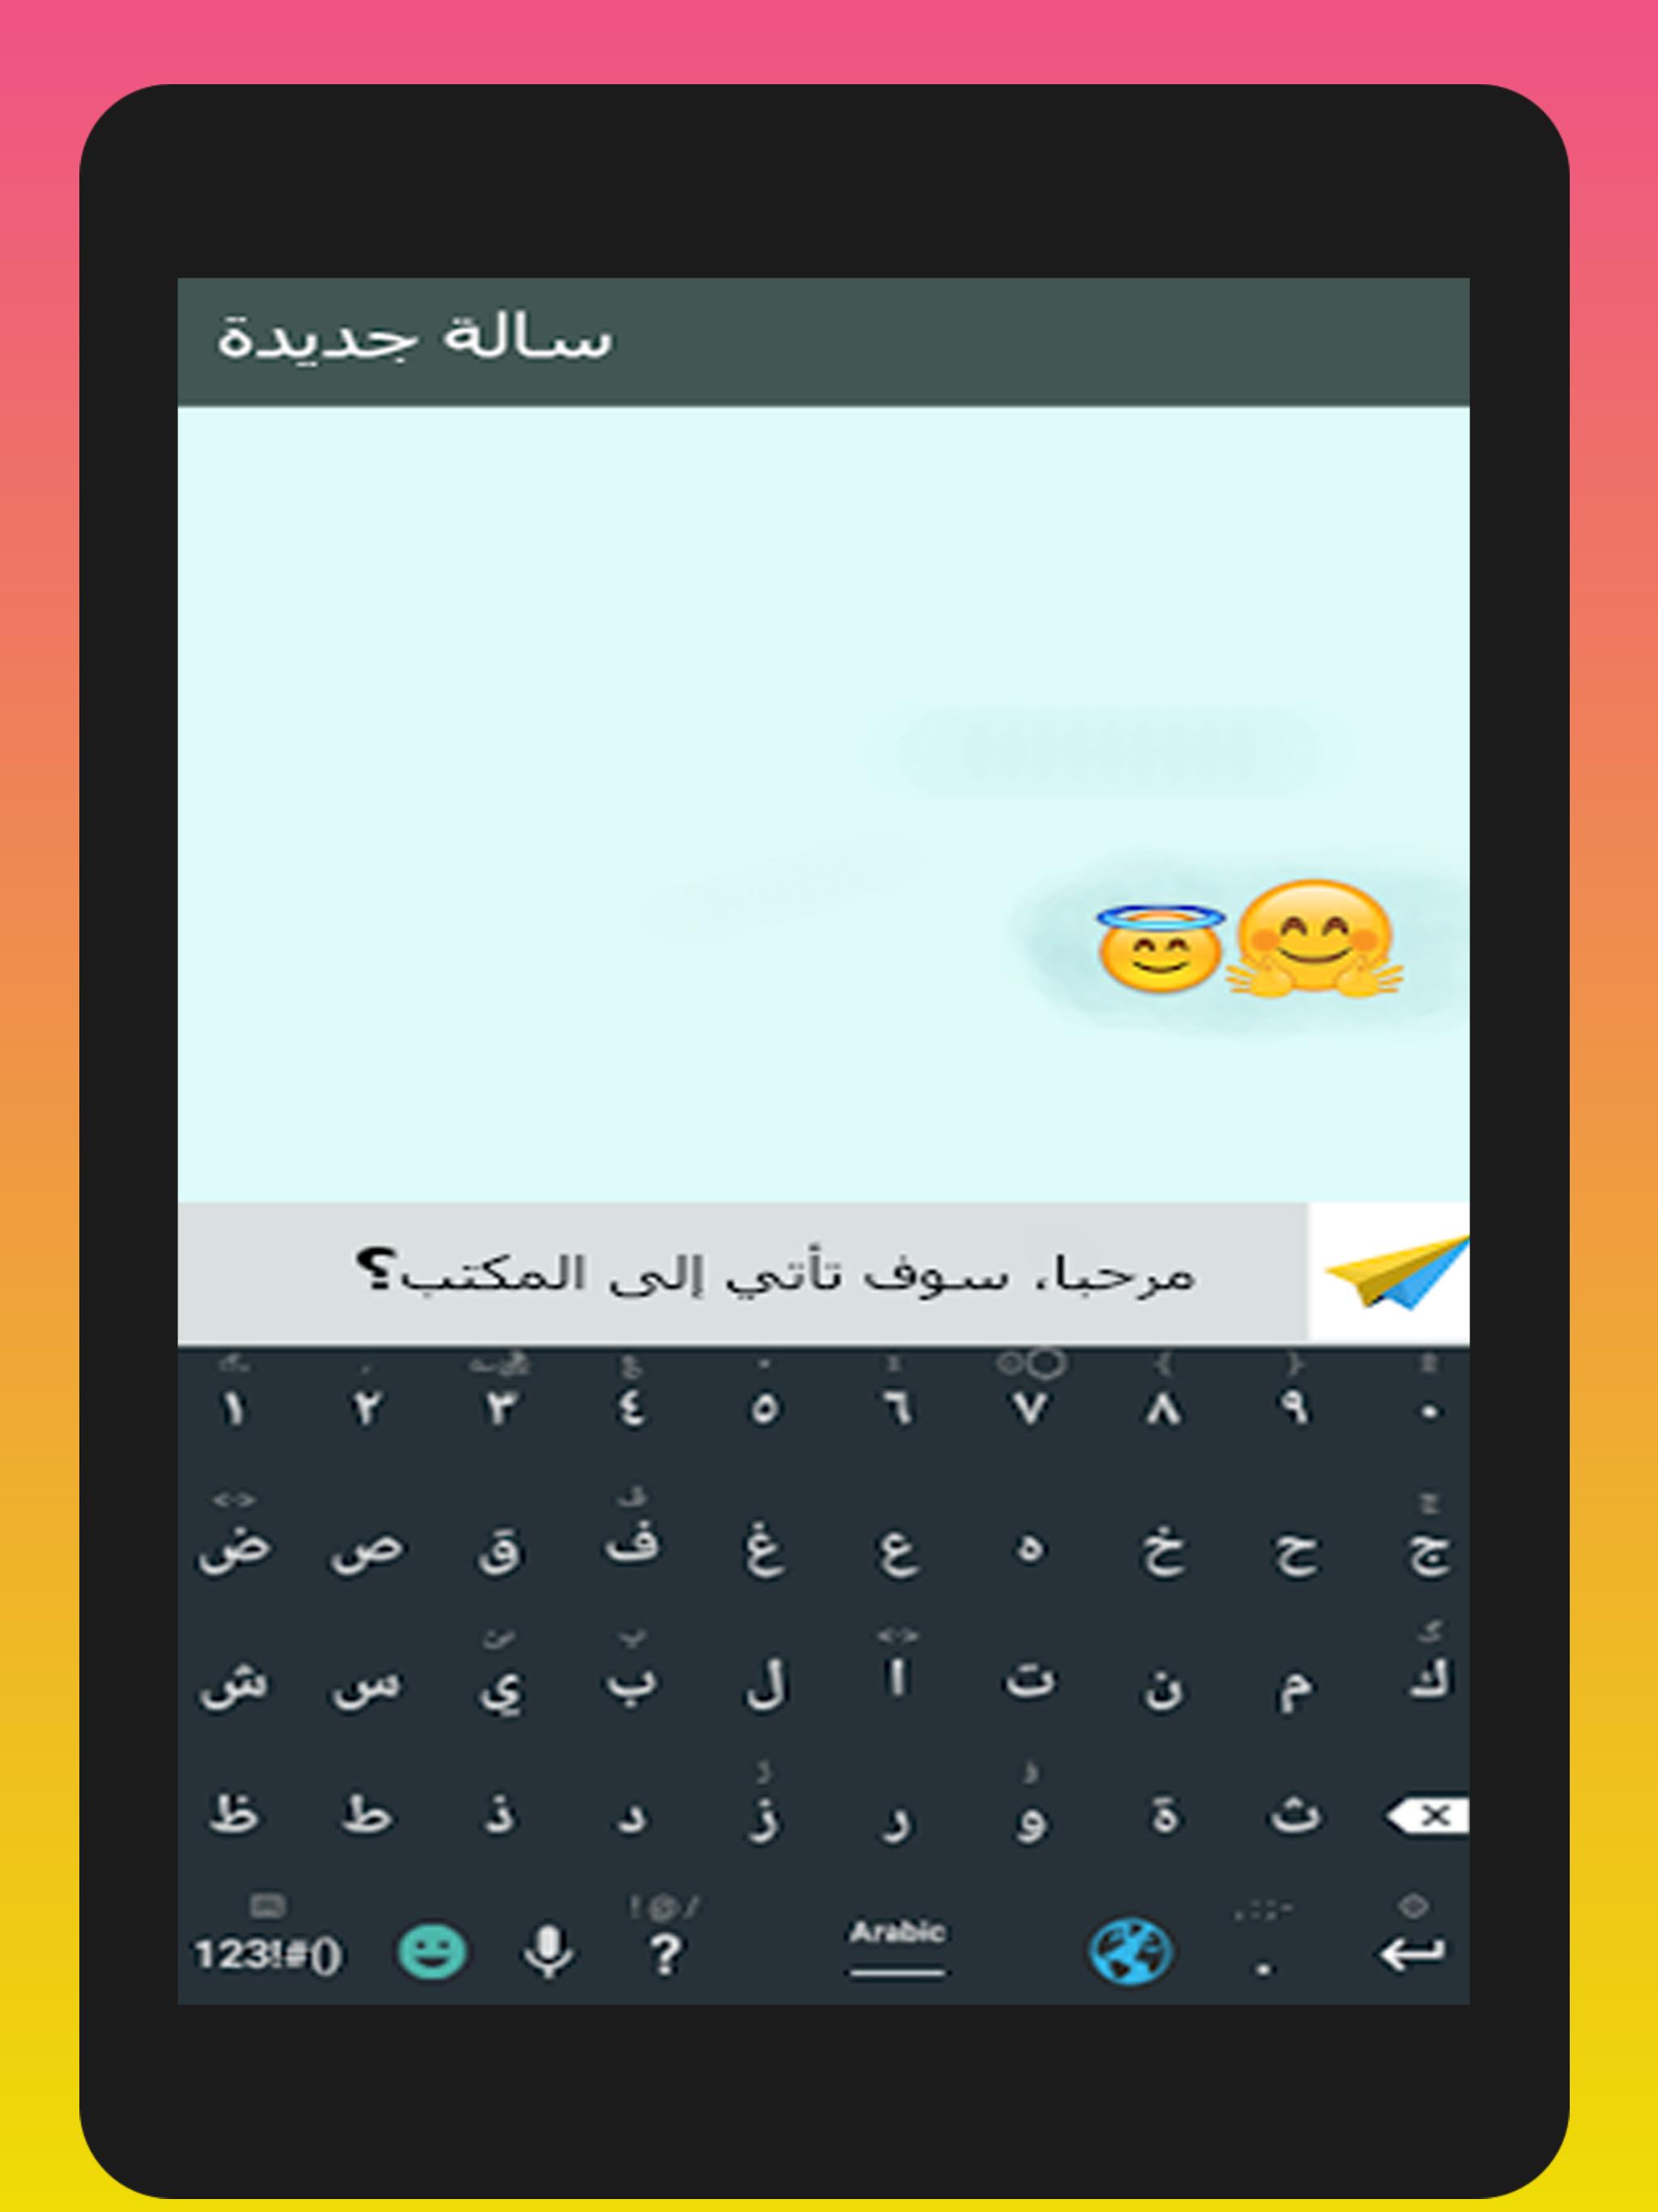 Clavier Arabic Francais English 2020 APK voor Android Download